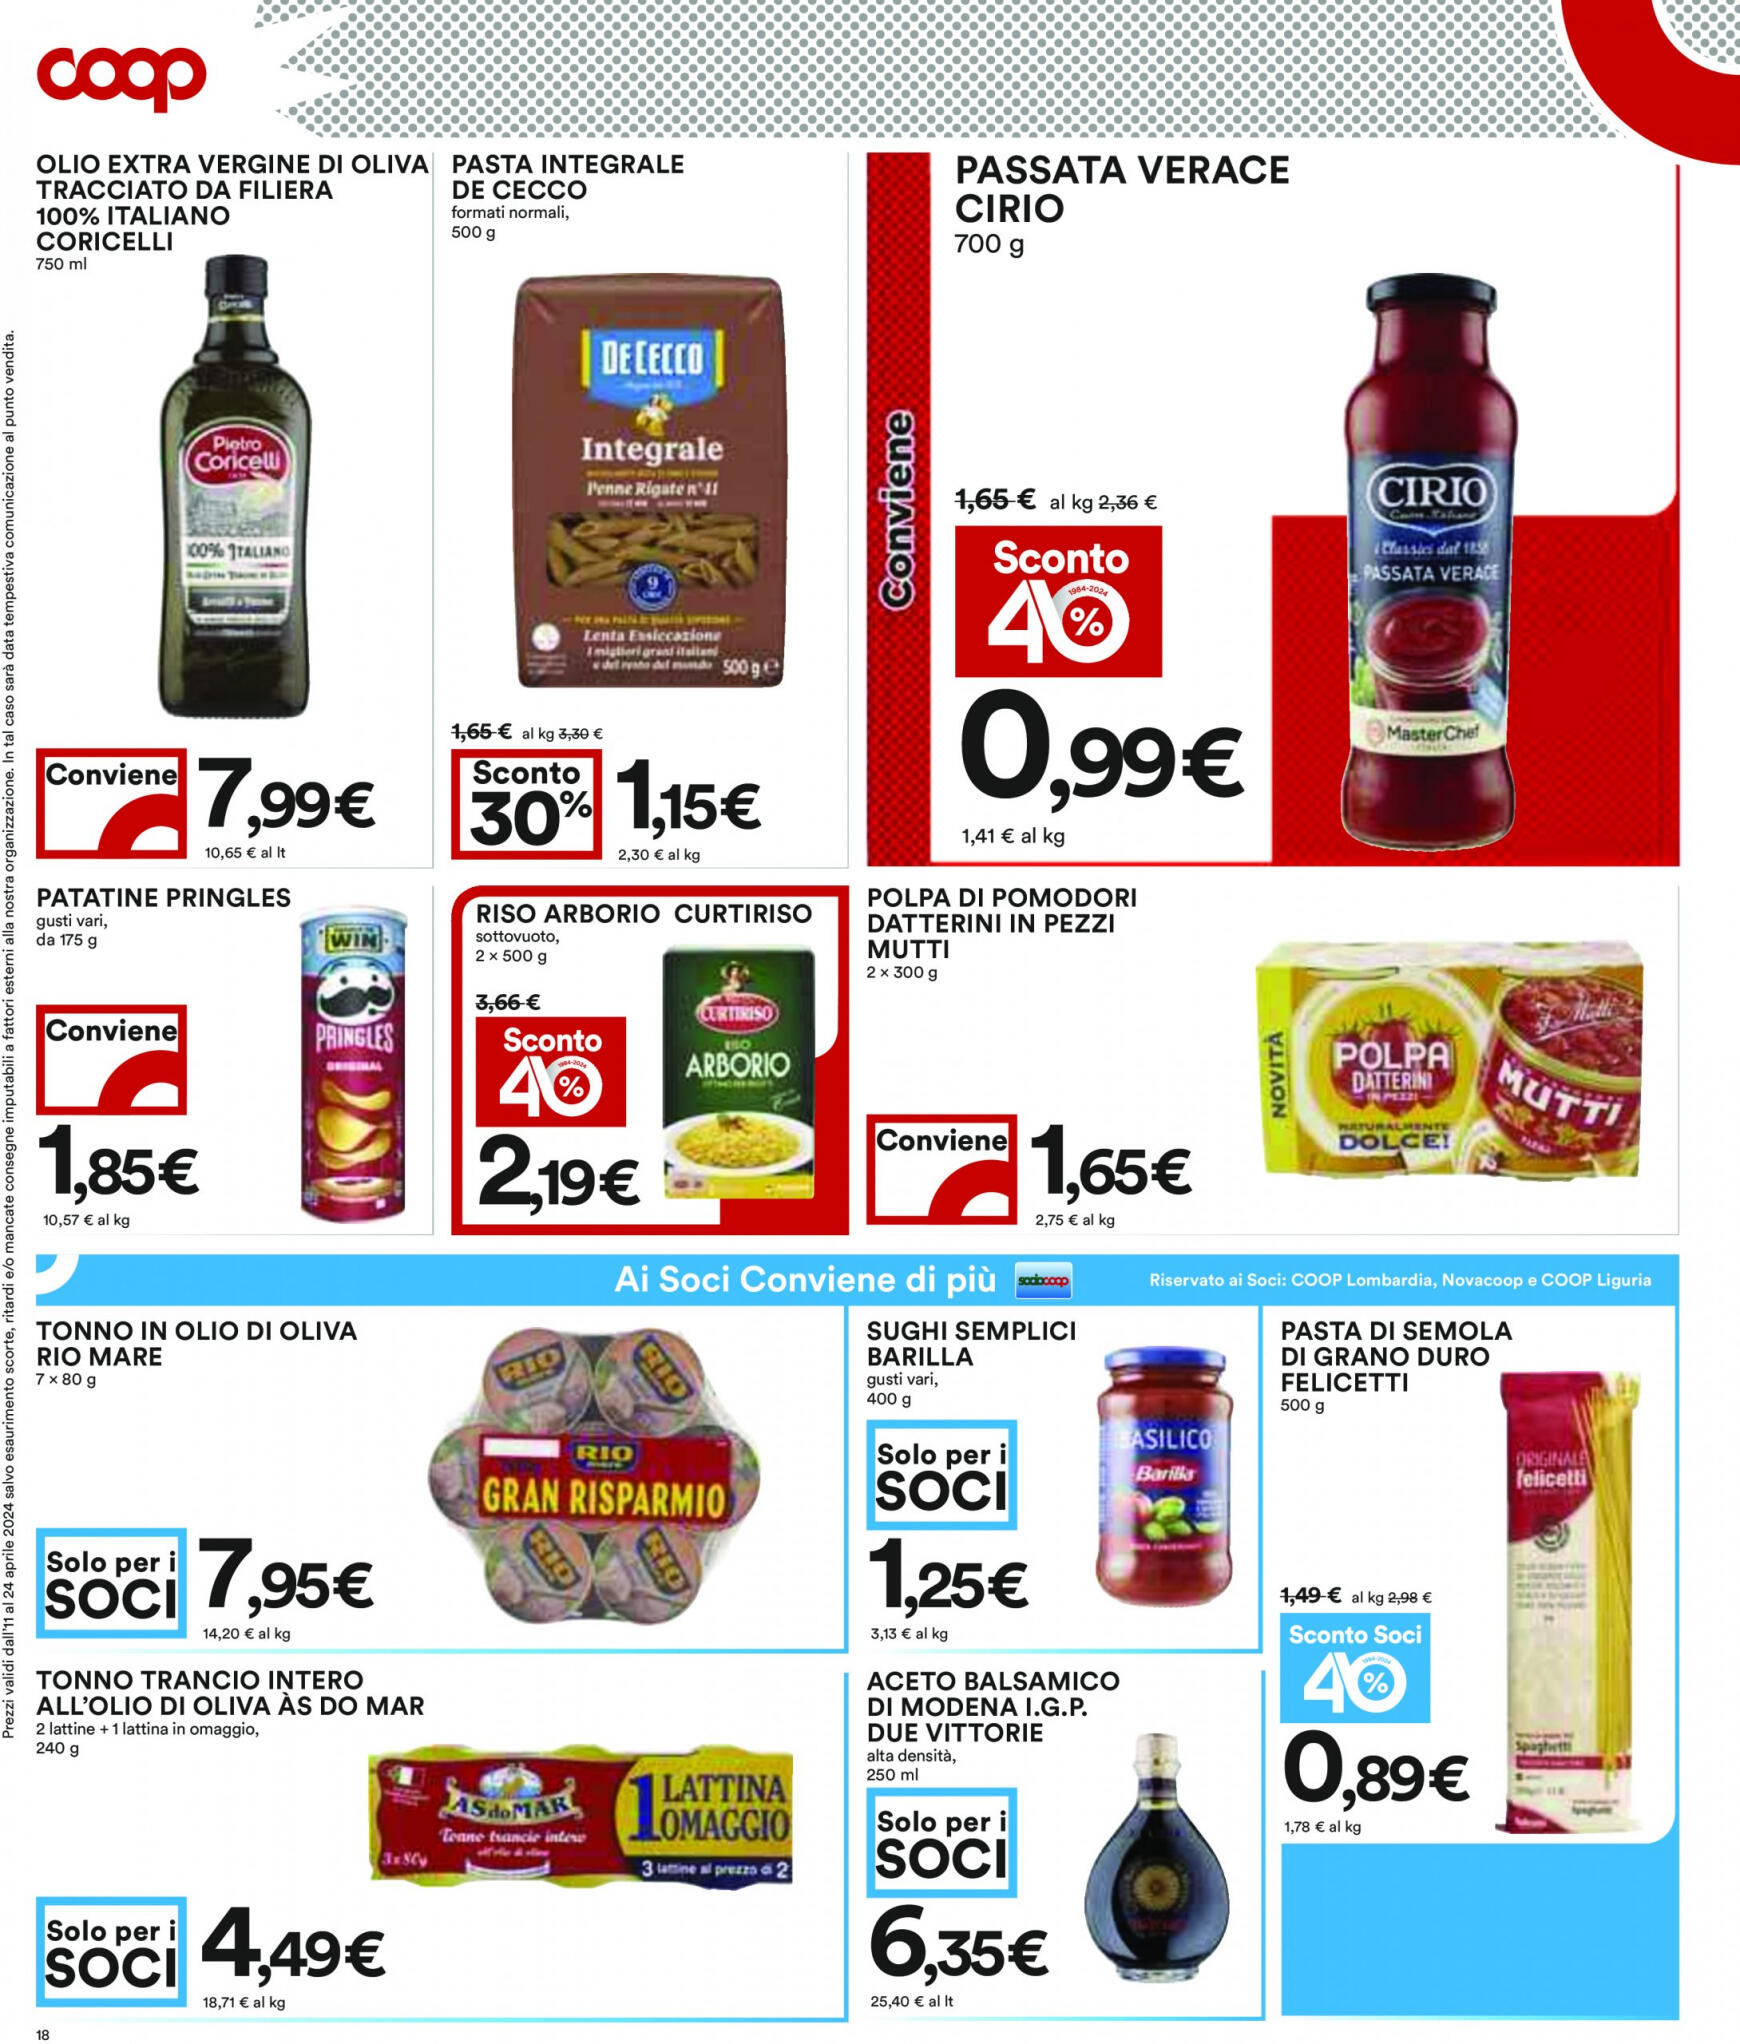 coop - Nuovo volantino Coop 11.04. - 24.04. - page: 18